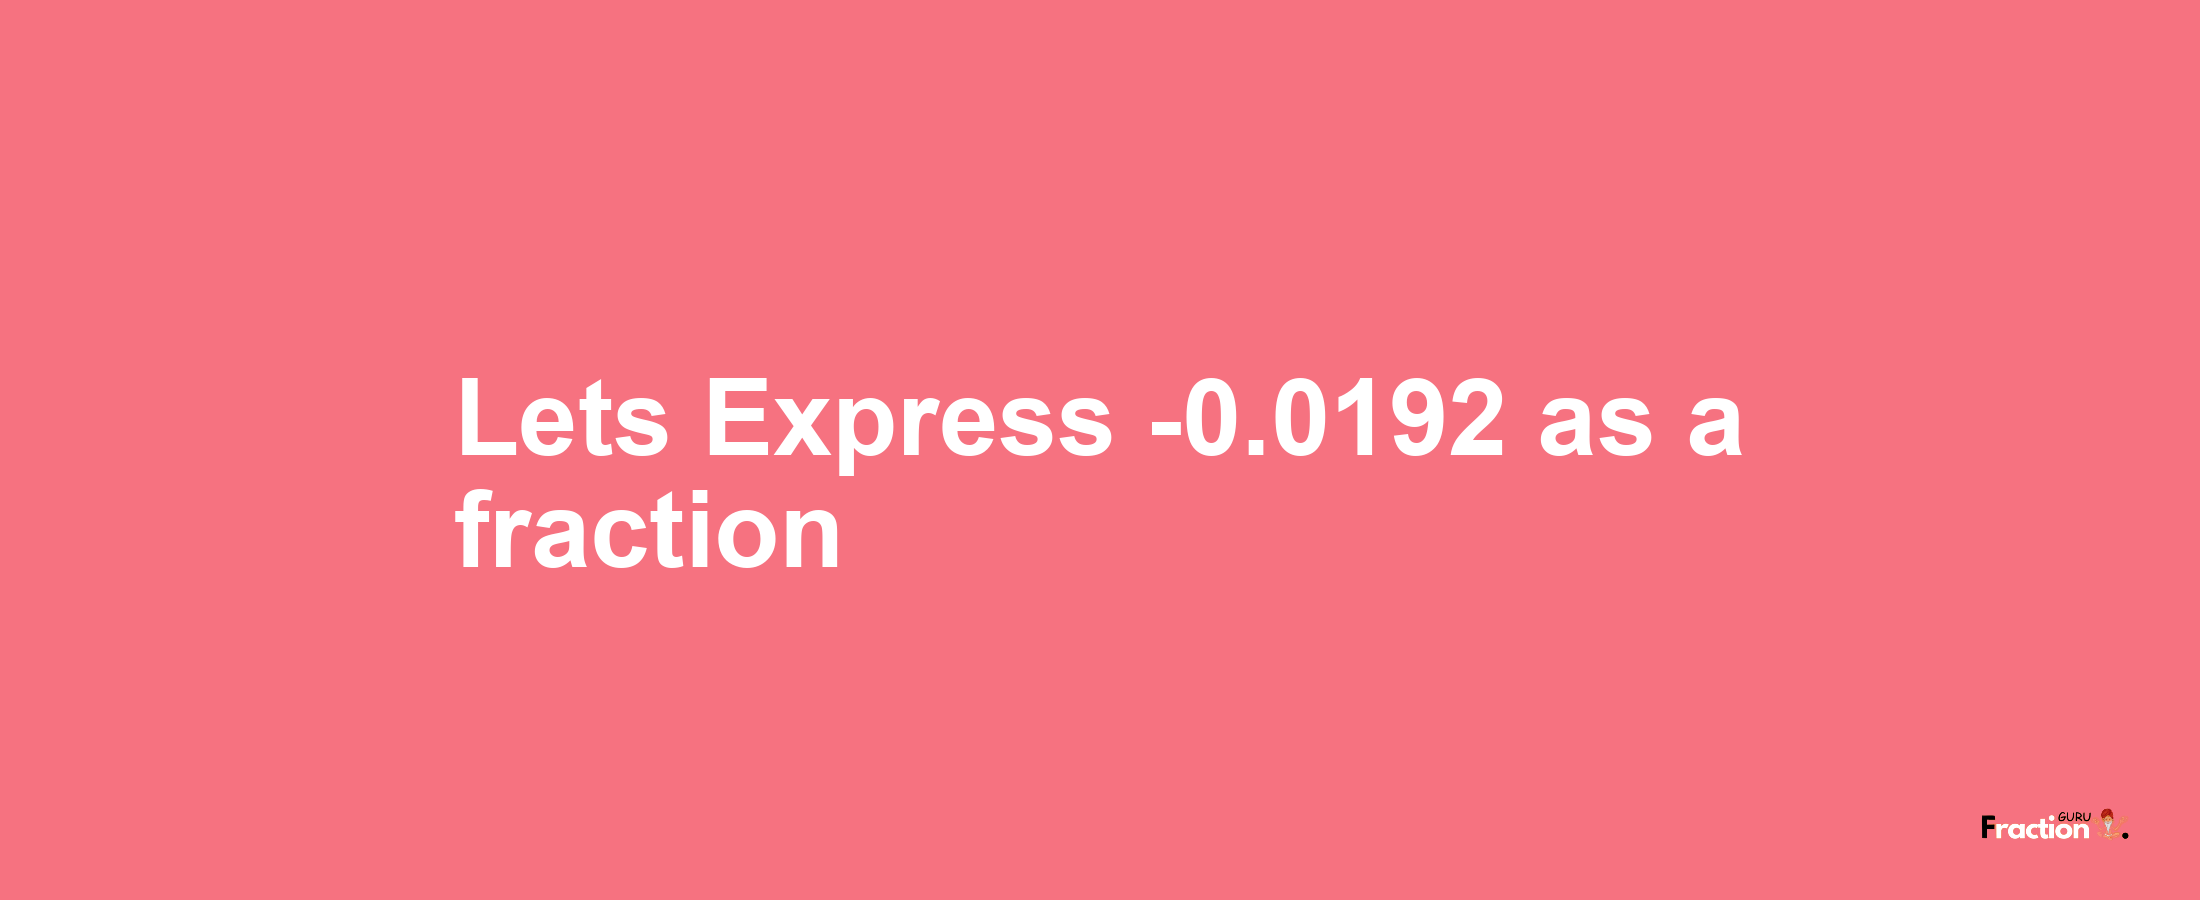 Lets Express -0.0192 as afraction